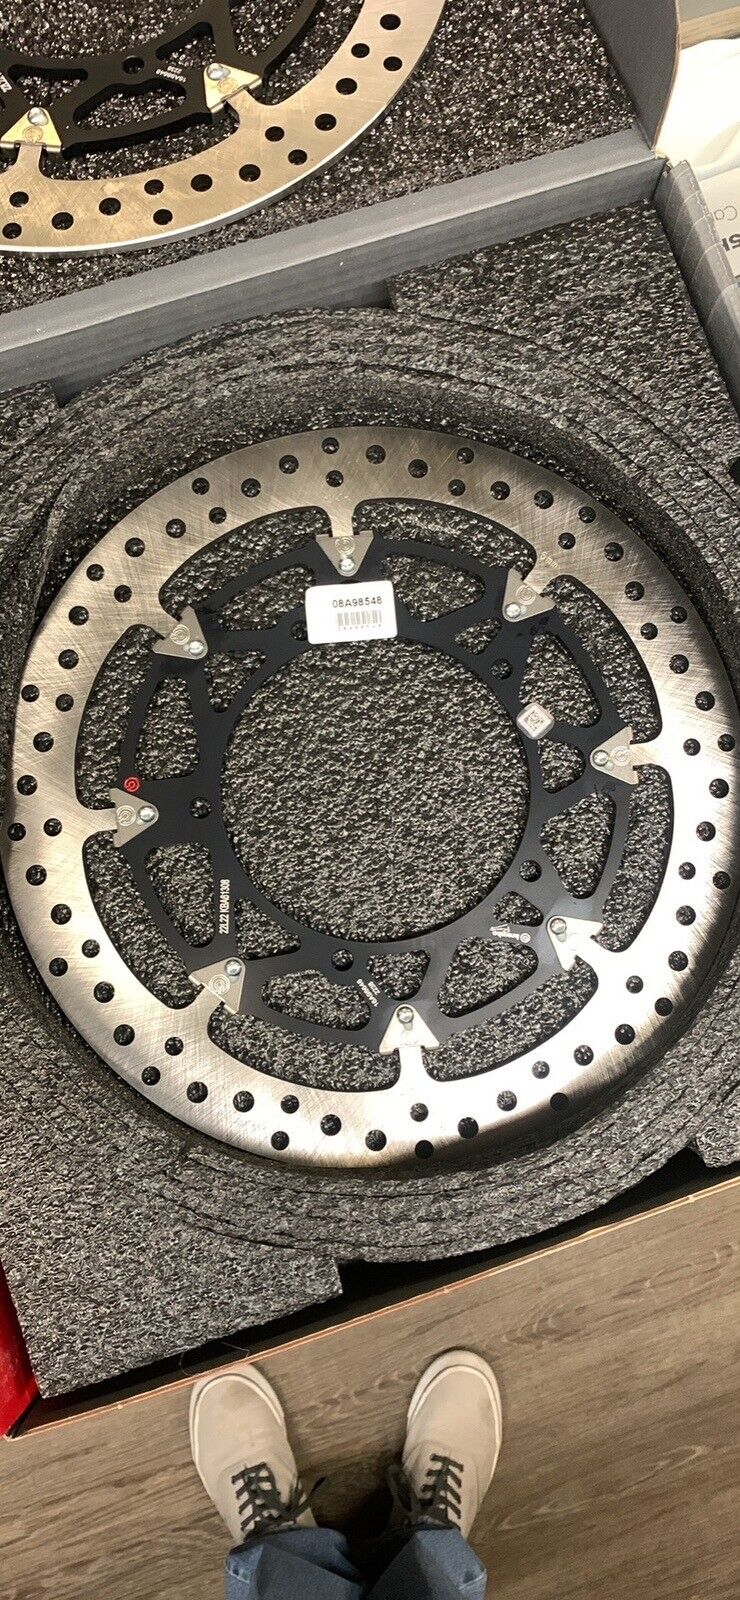 NIB Brembo 208A98548 320mm x 5.5mm Rotors For Yamaha YZF-R1 And Other Models